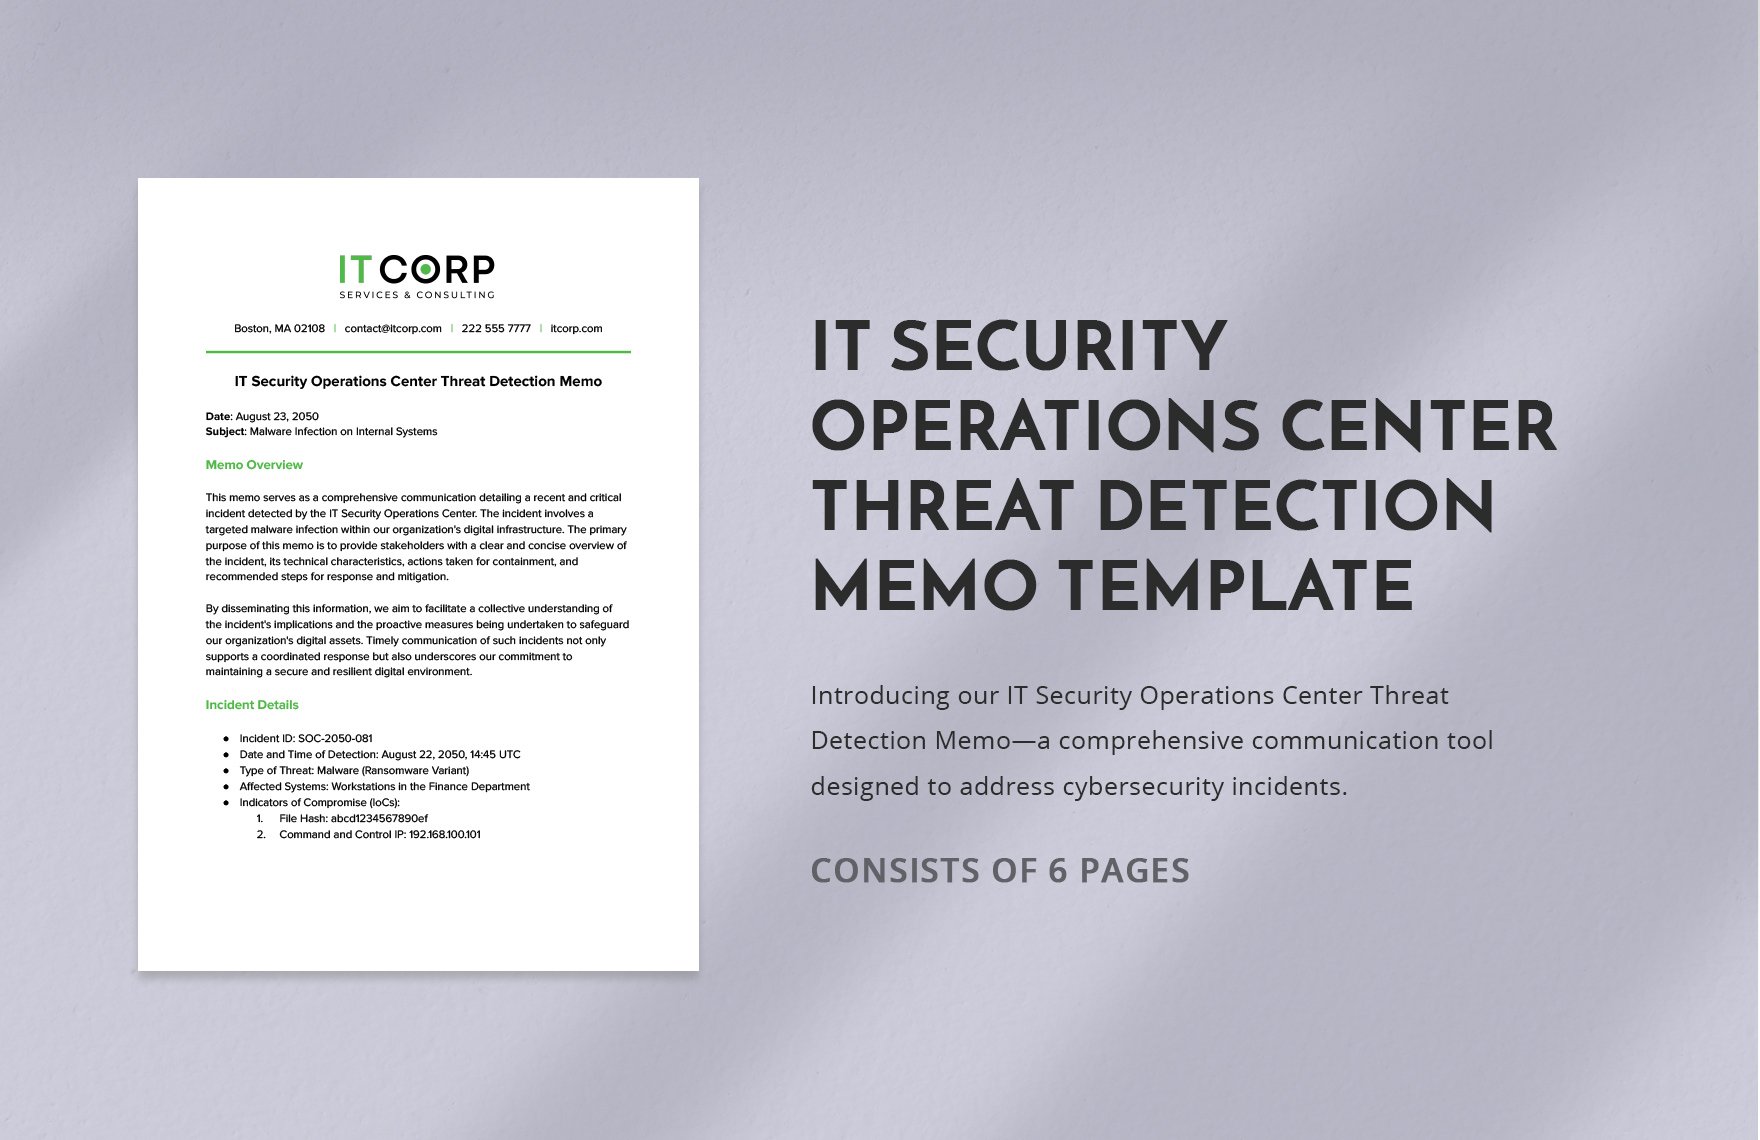 IT Security Operations Center Threat Detection Memo Template in Word, Google Docs, PDF